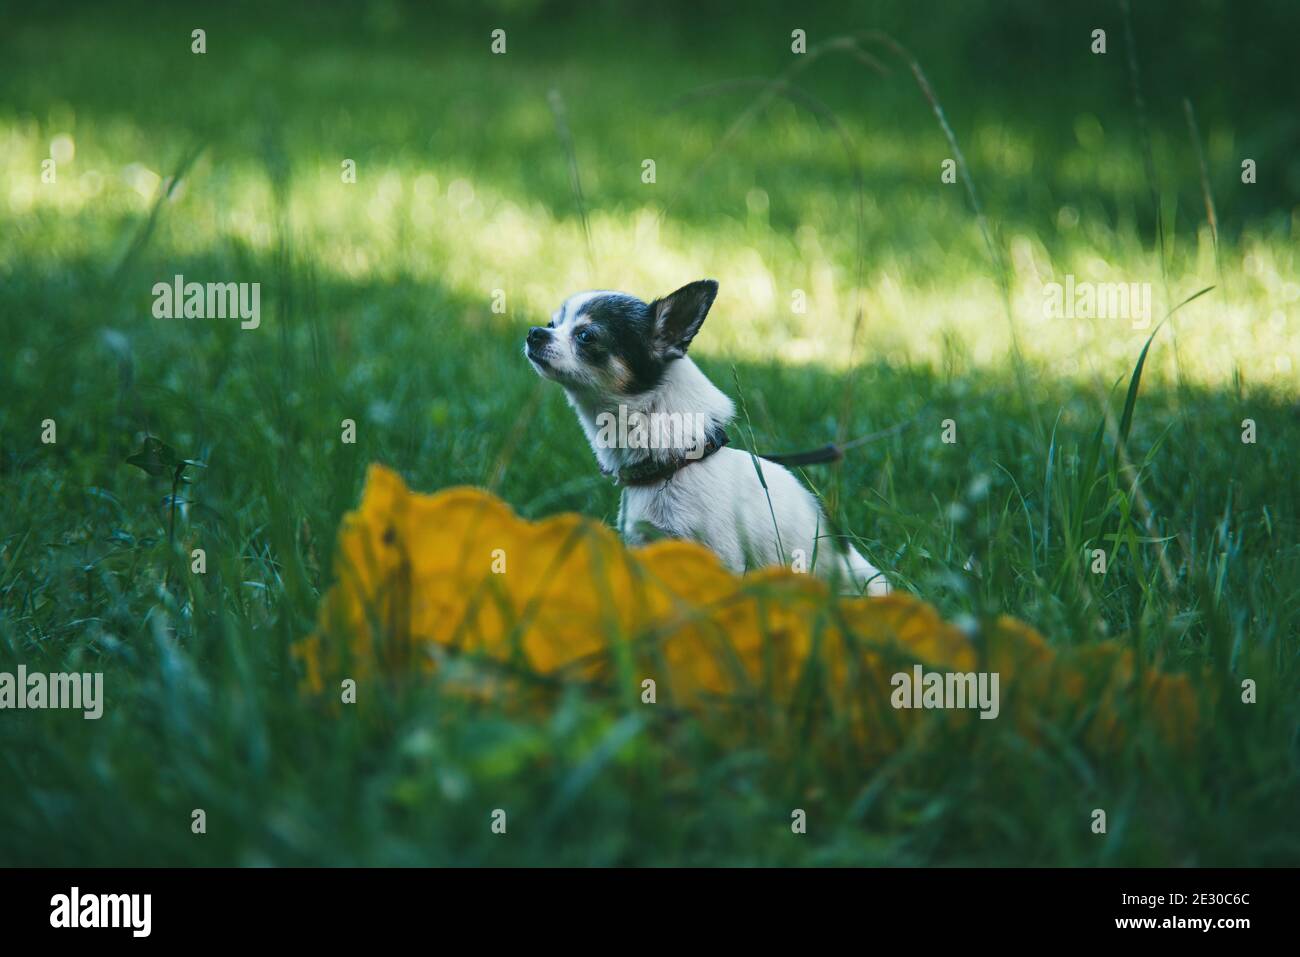 A small funny Chihuahua dog sitting on the green grass yard and sniffing the air against a blurred summer garden. Stay at home coronavirus covid-19 Stock Photo